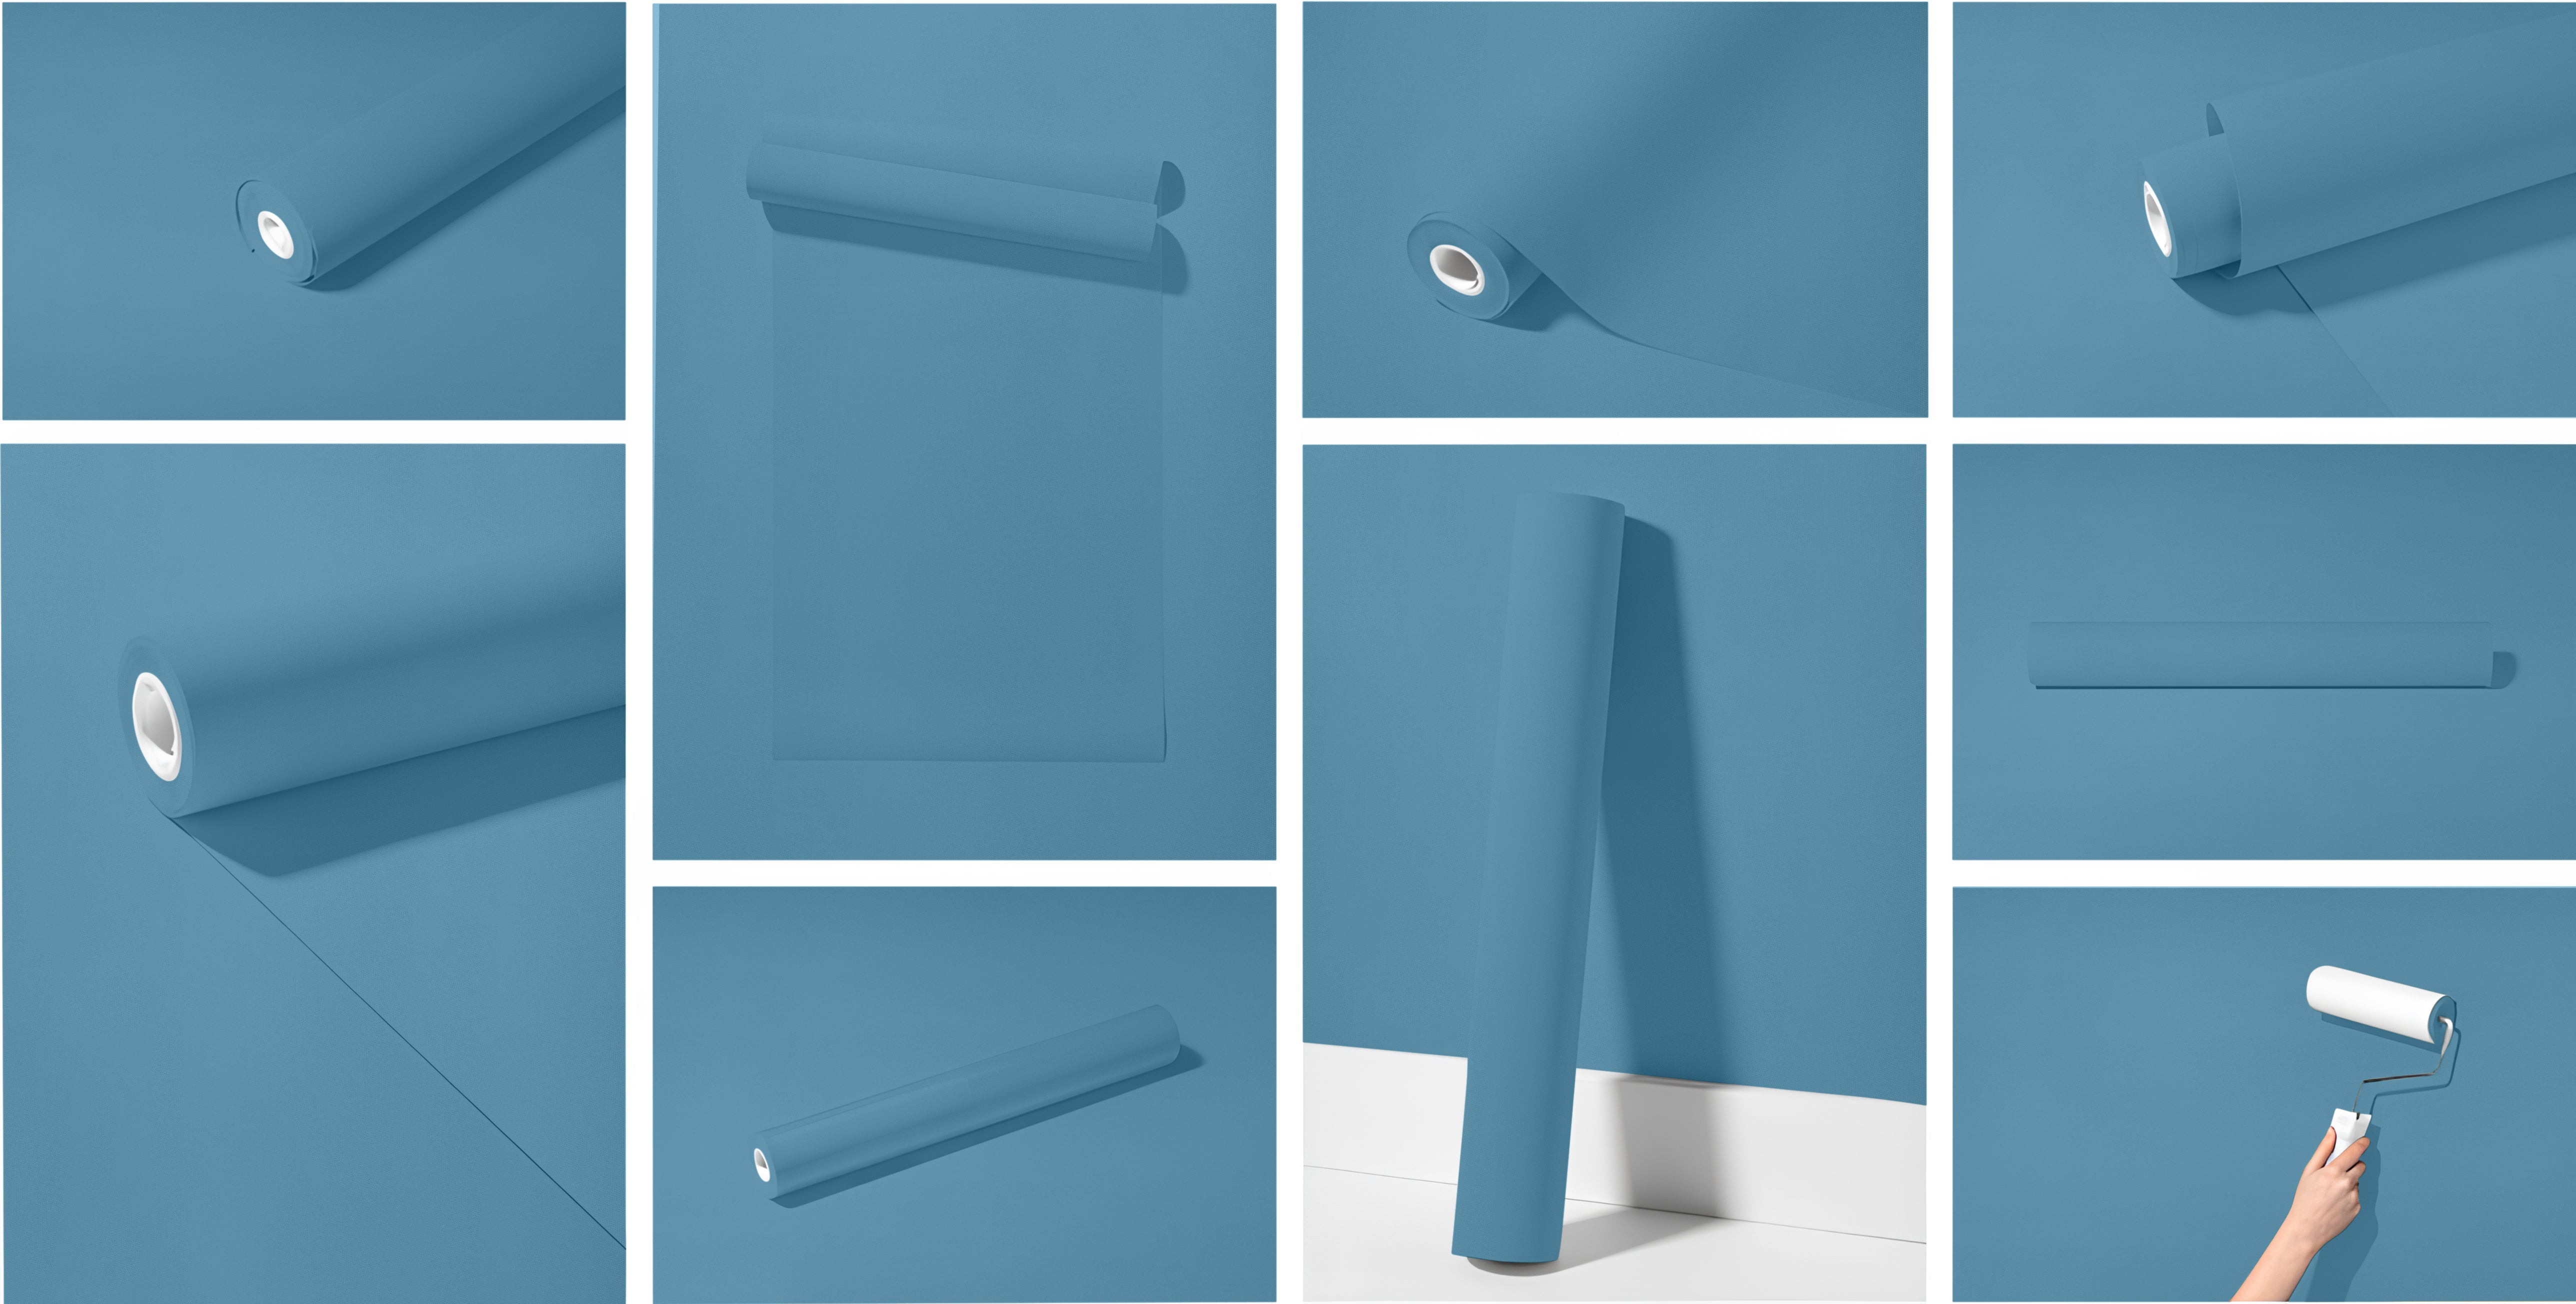 Peel & Stick Removable Re-usable Paint - Color RAL 5024 Pastel Blue - offRAL™ - RALRAW LLC, USA